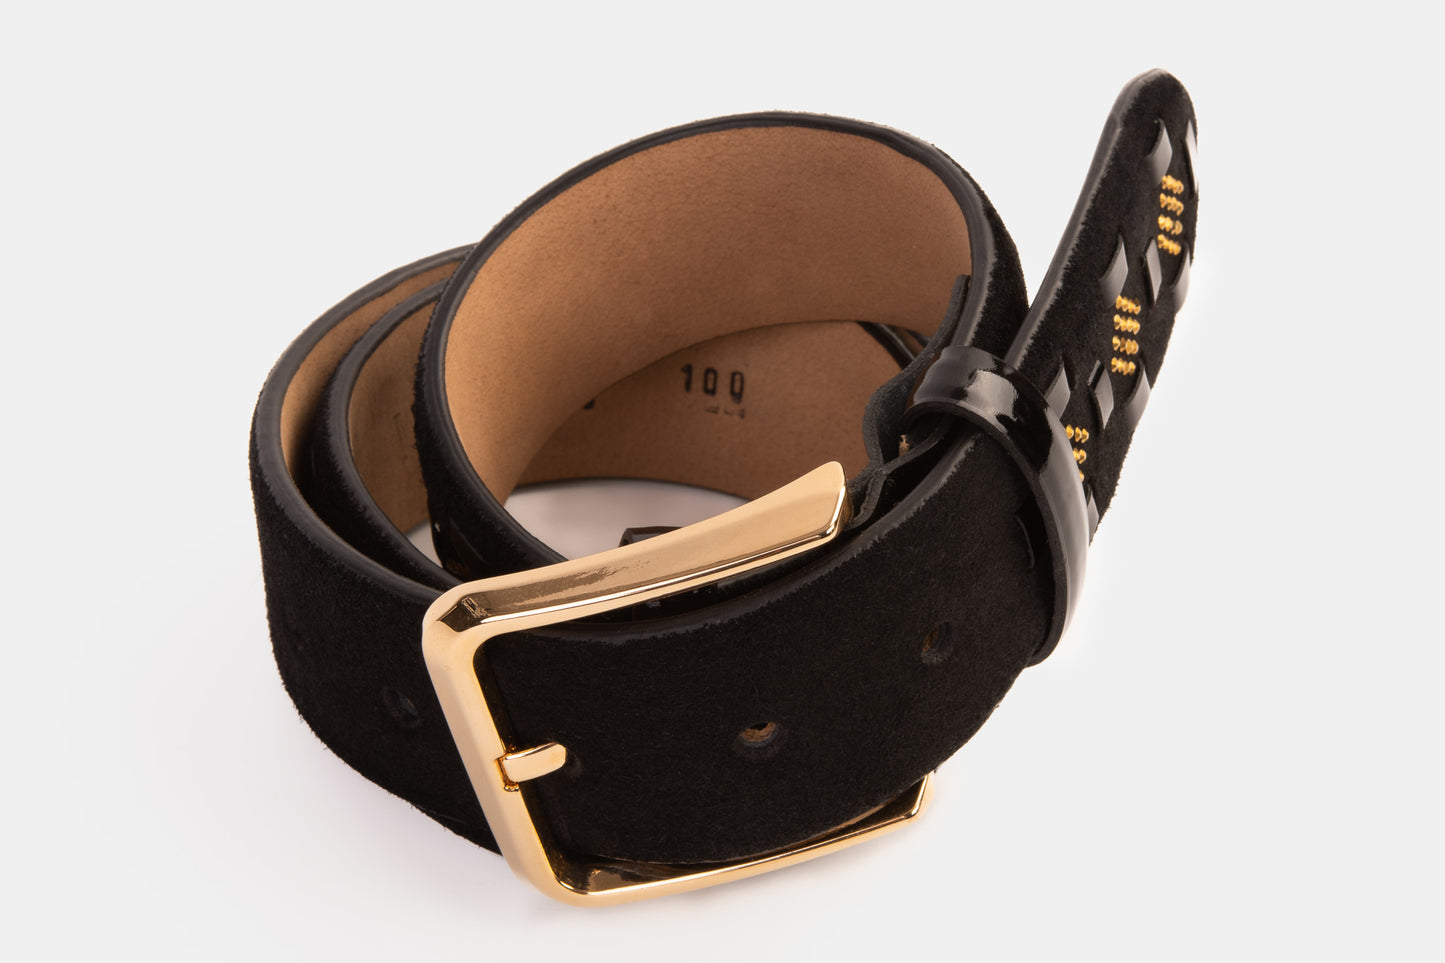 The Vicino Black Leather Belt